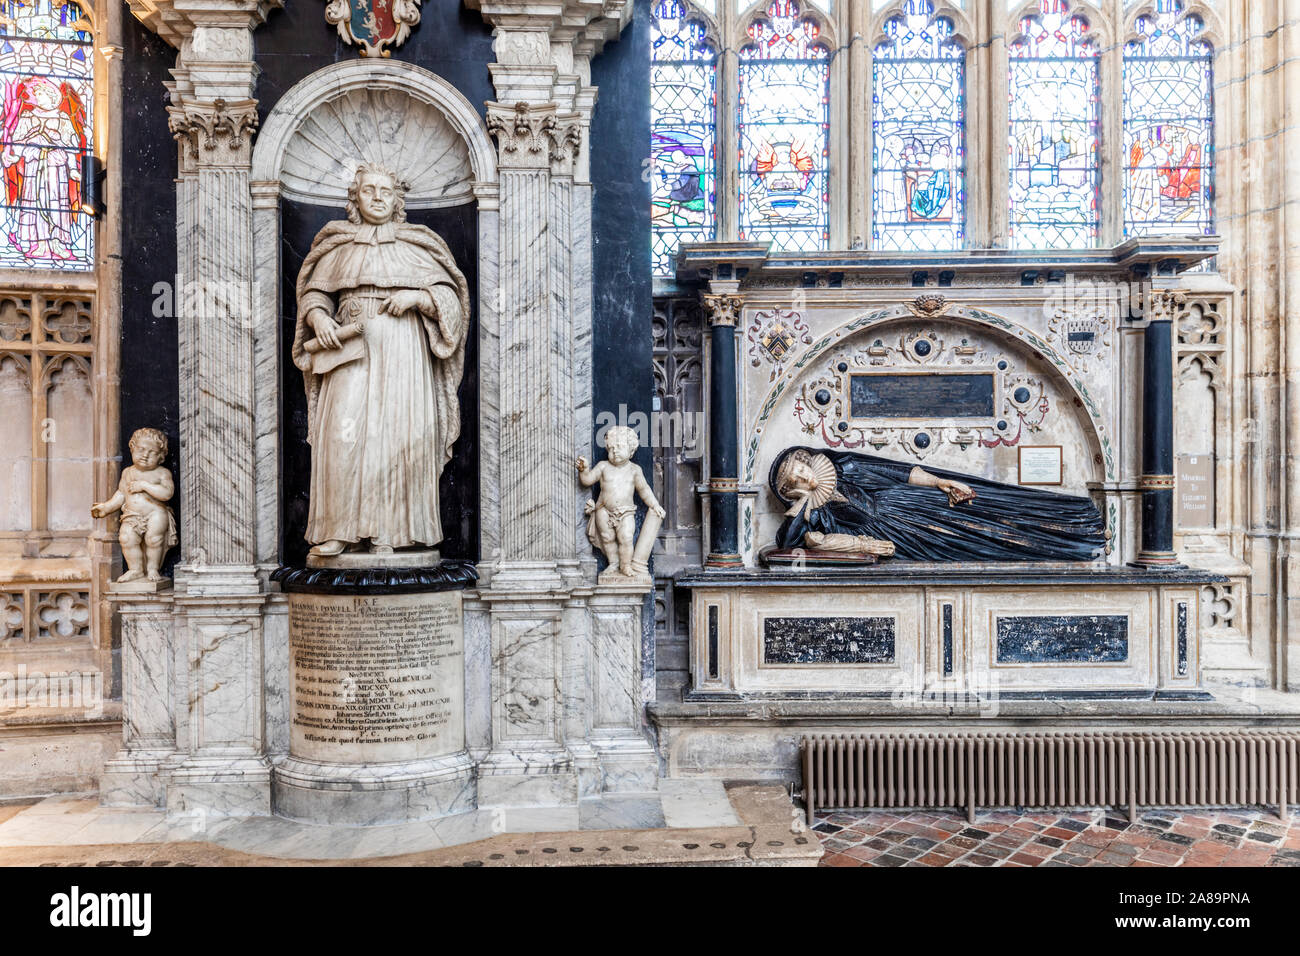 Memorials in 16th C Lady Chapel in Gloucester Cathedral UK - Judge Johannes (John) Powell died 1714 and Elizabeth Williams died in childbirth in 1622. Stock Photo